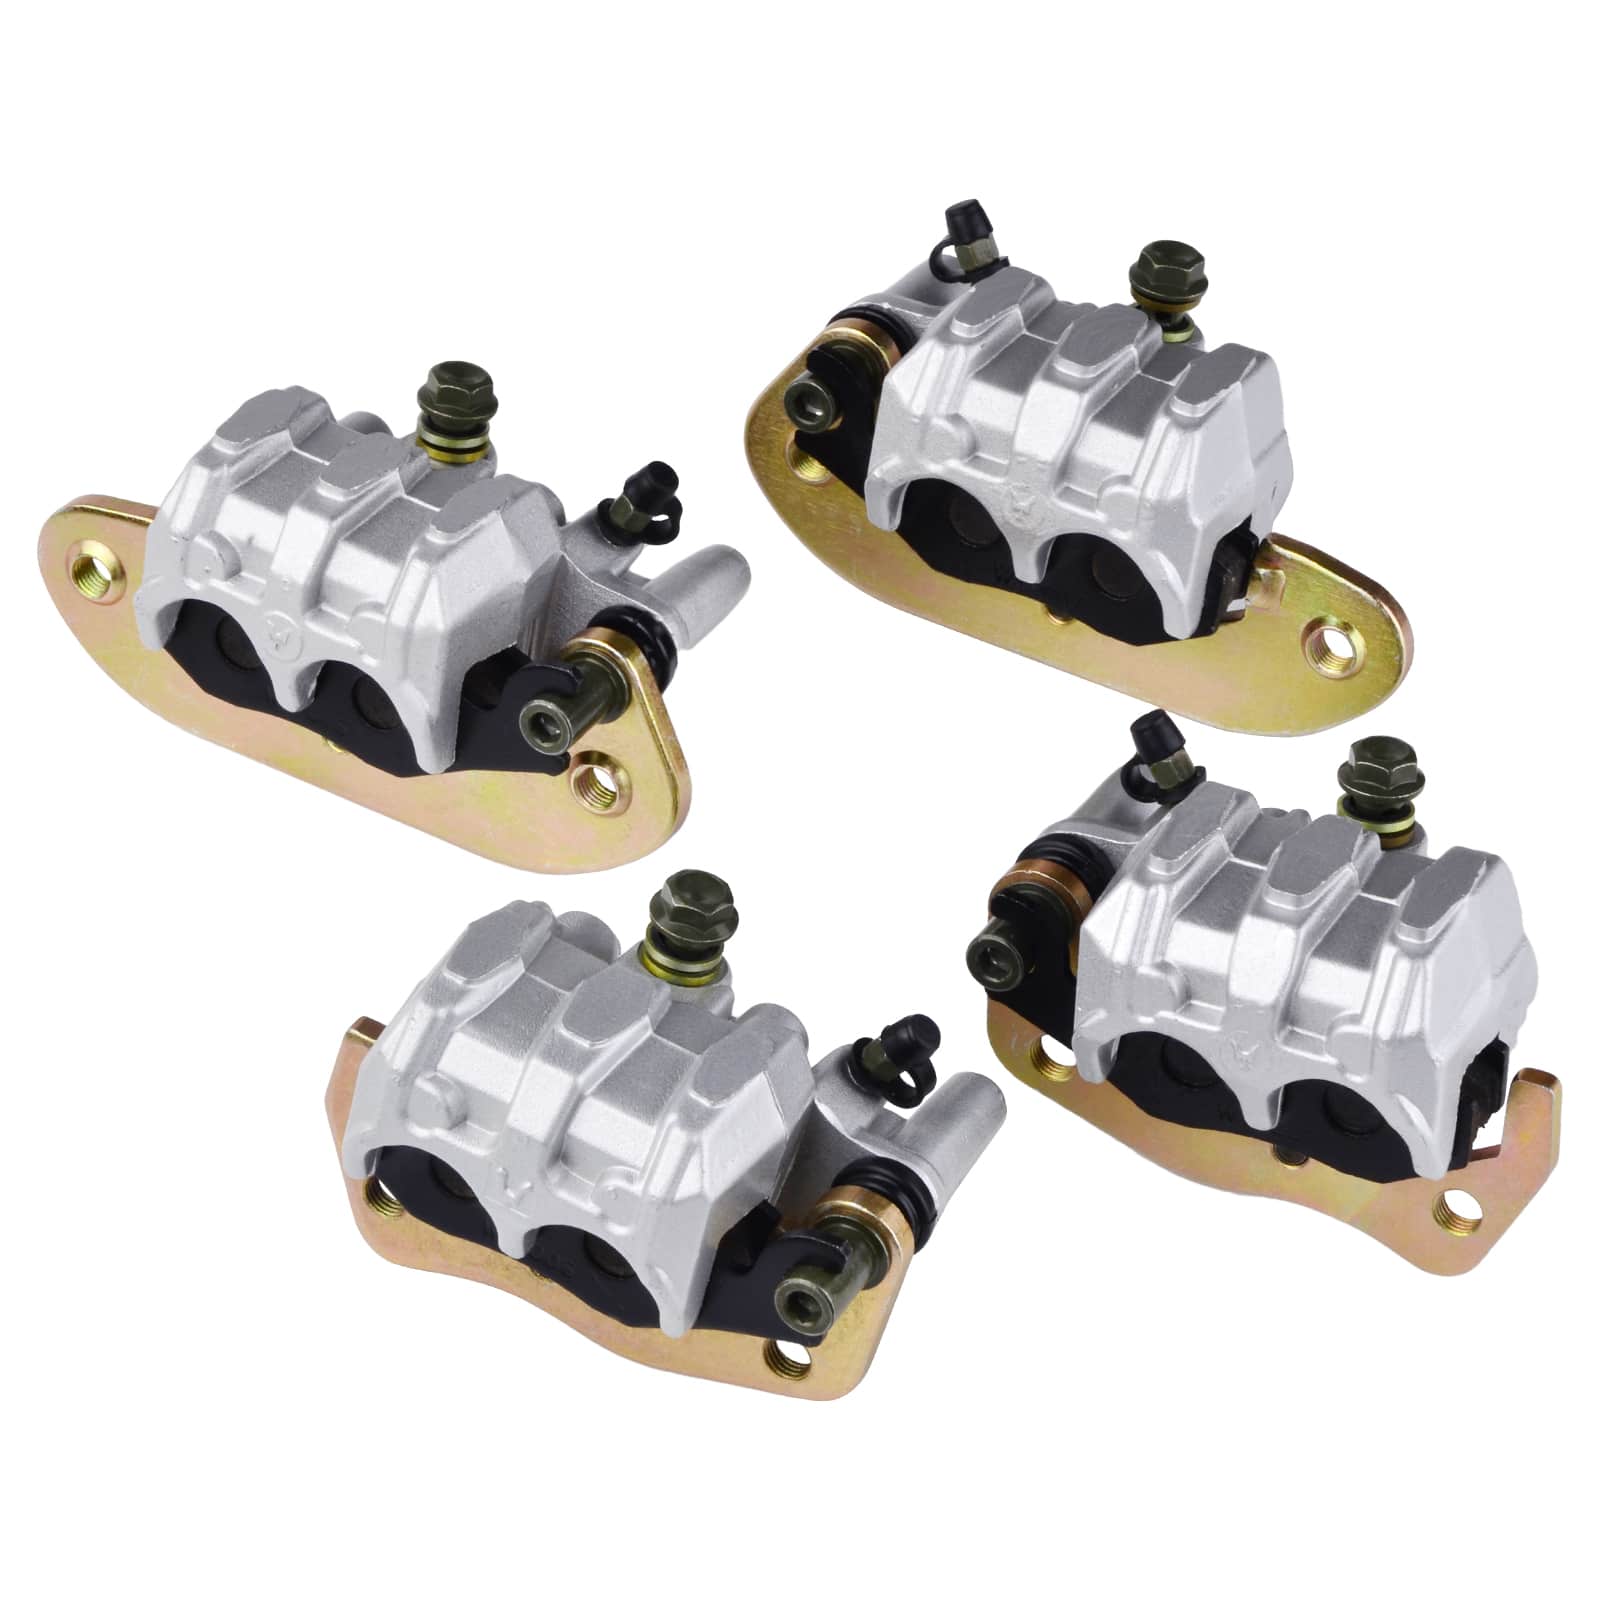 Front + Rear Brake Calipers Set with Pads for Yamaha ATV Rhino 700